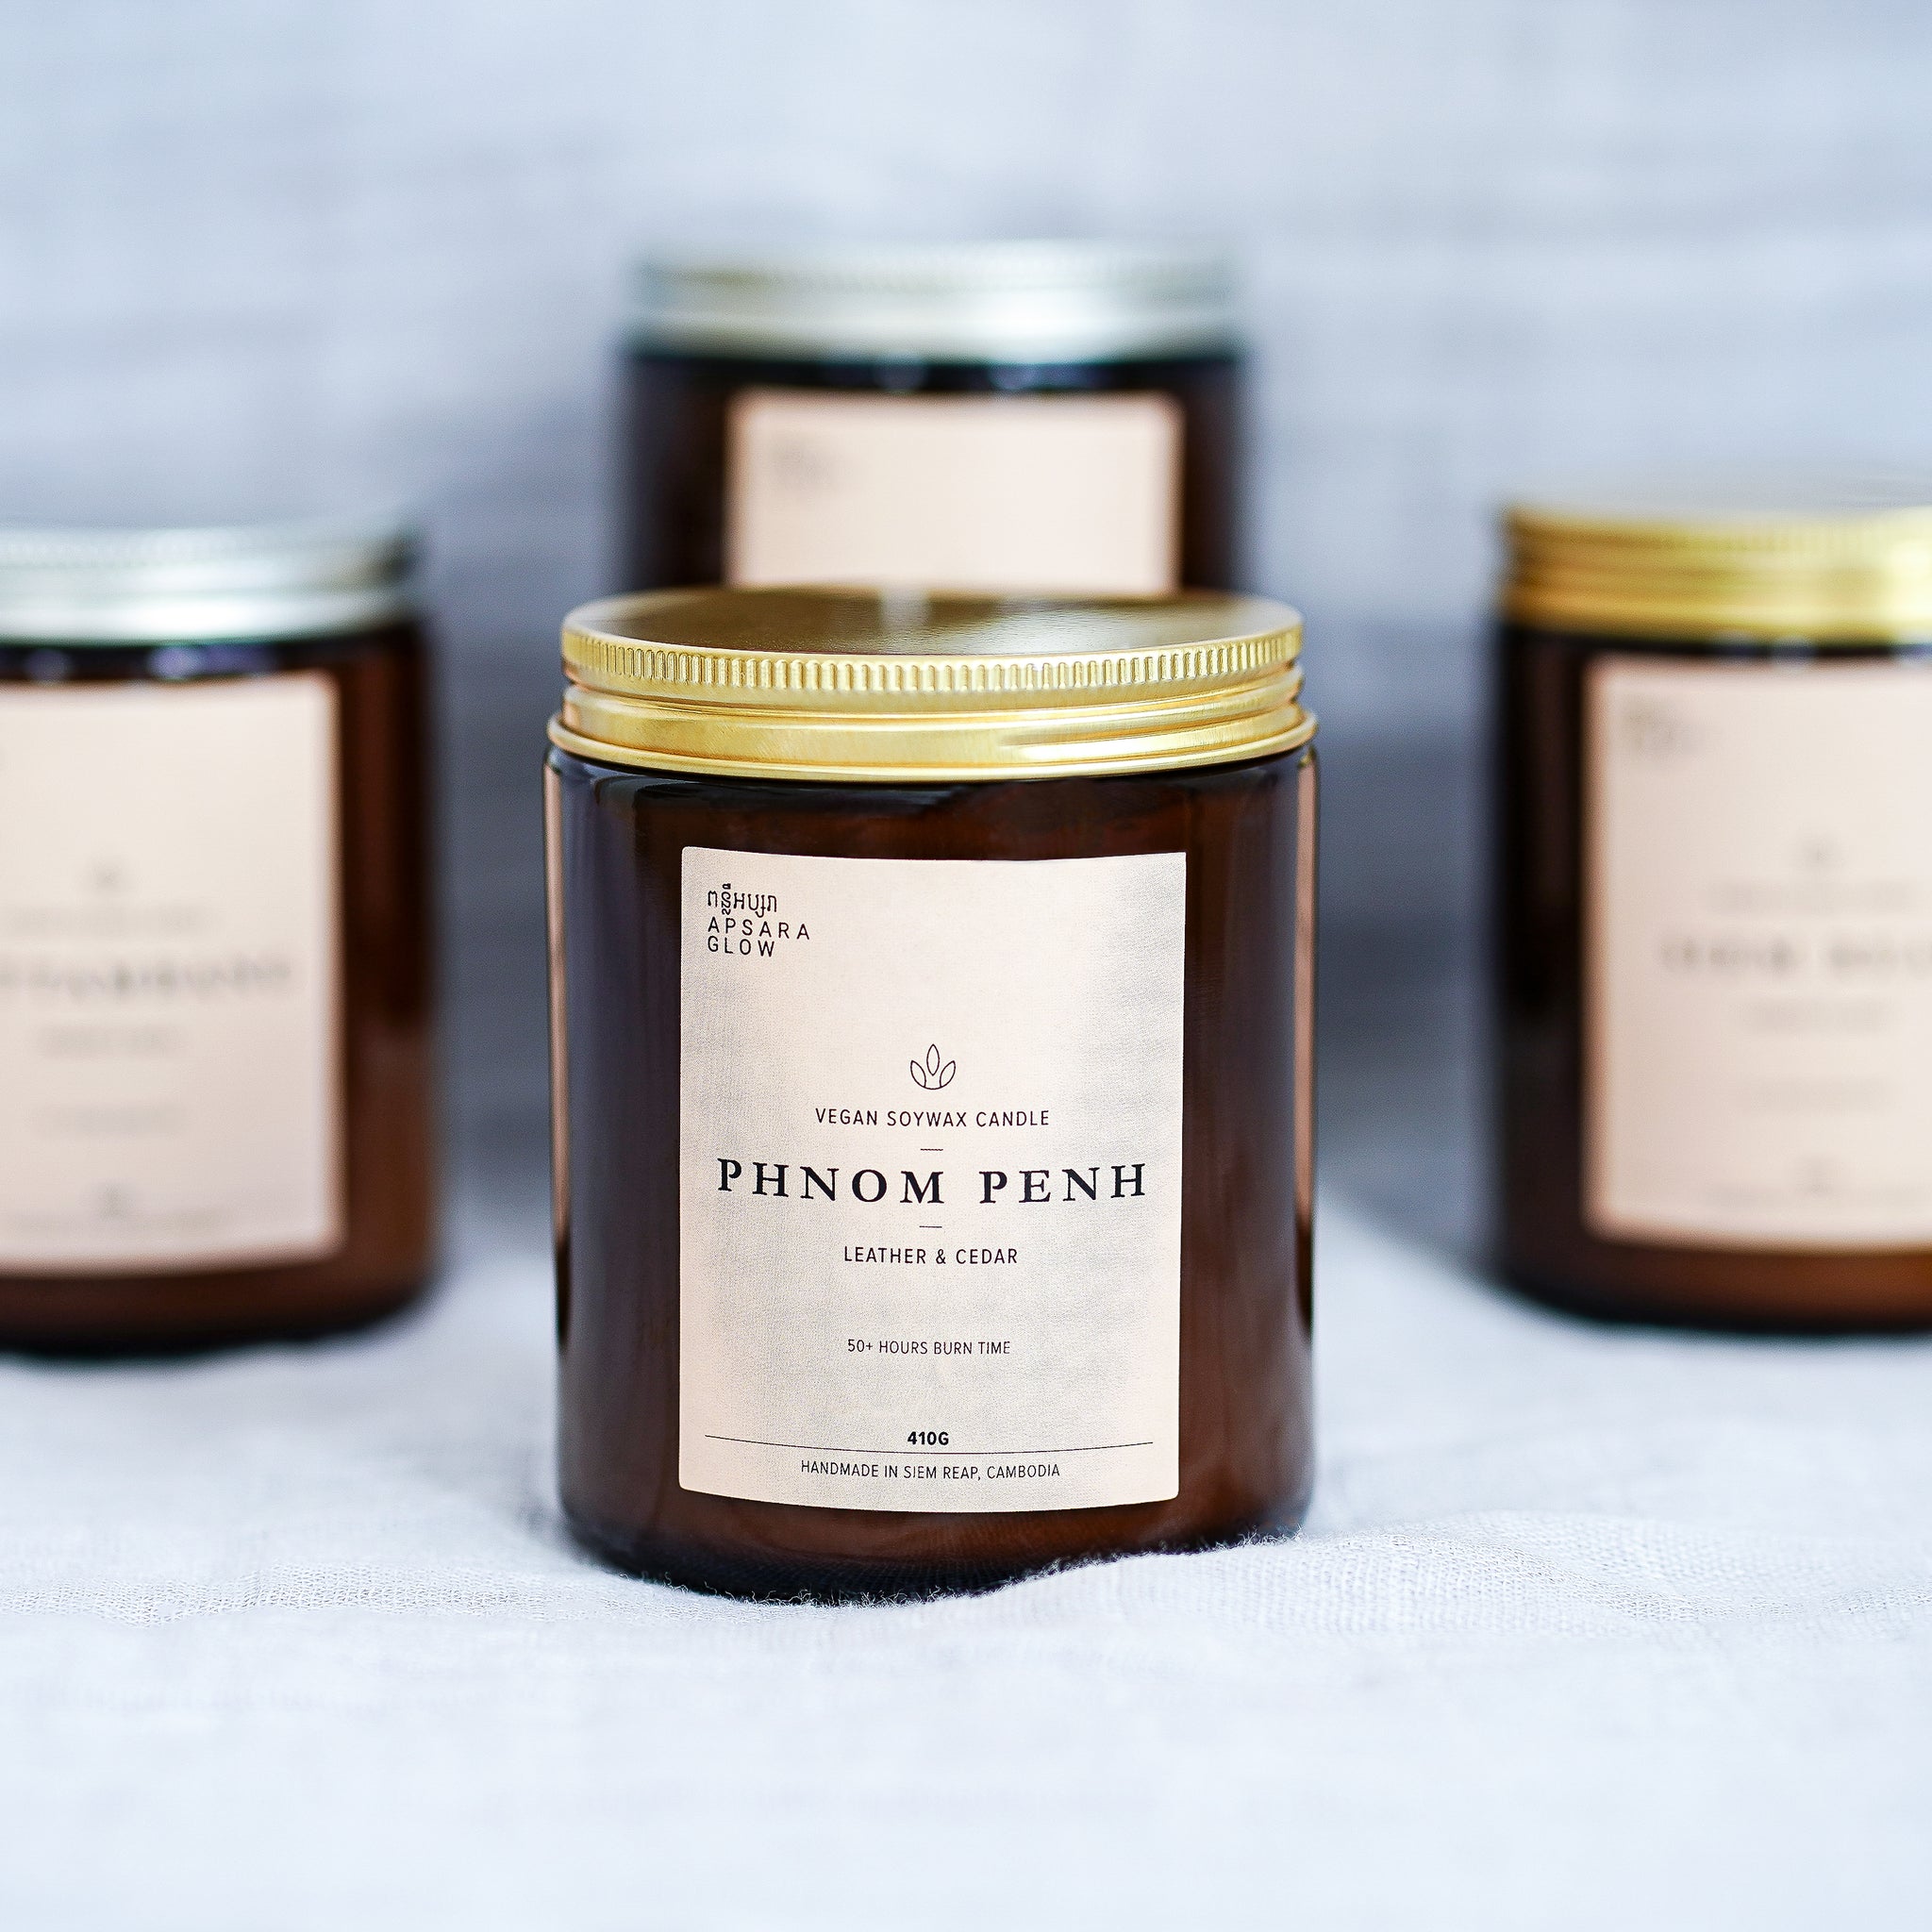 Fill your room with this woody candle. This natural, vegan soy wax candle features masculine scent of smoky leather with hints of fresh woody cedar. It is inspired by the capital of Cambodia, Phnom Penh, famously known for its bustling and robust movements.